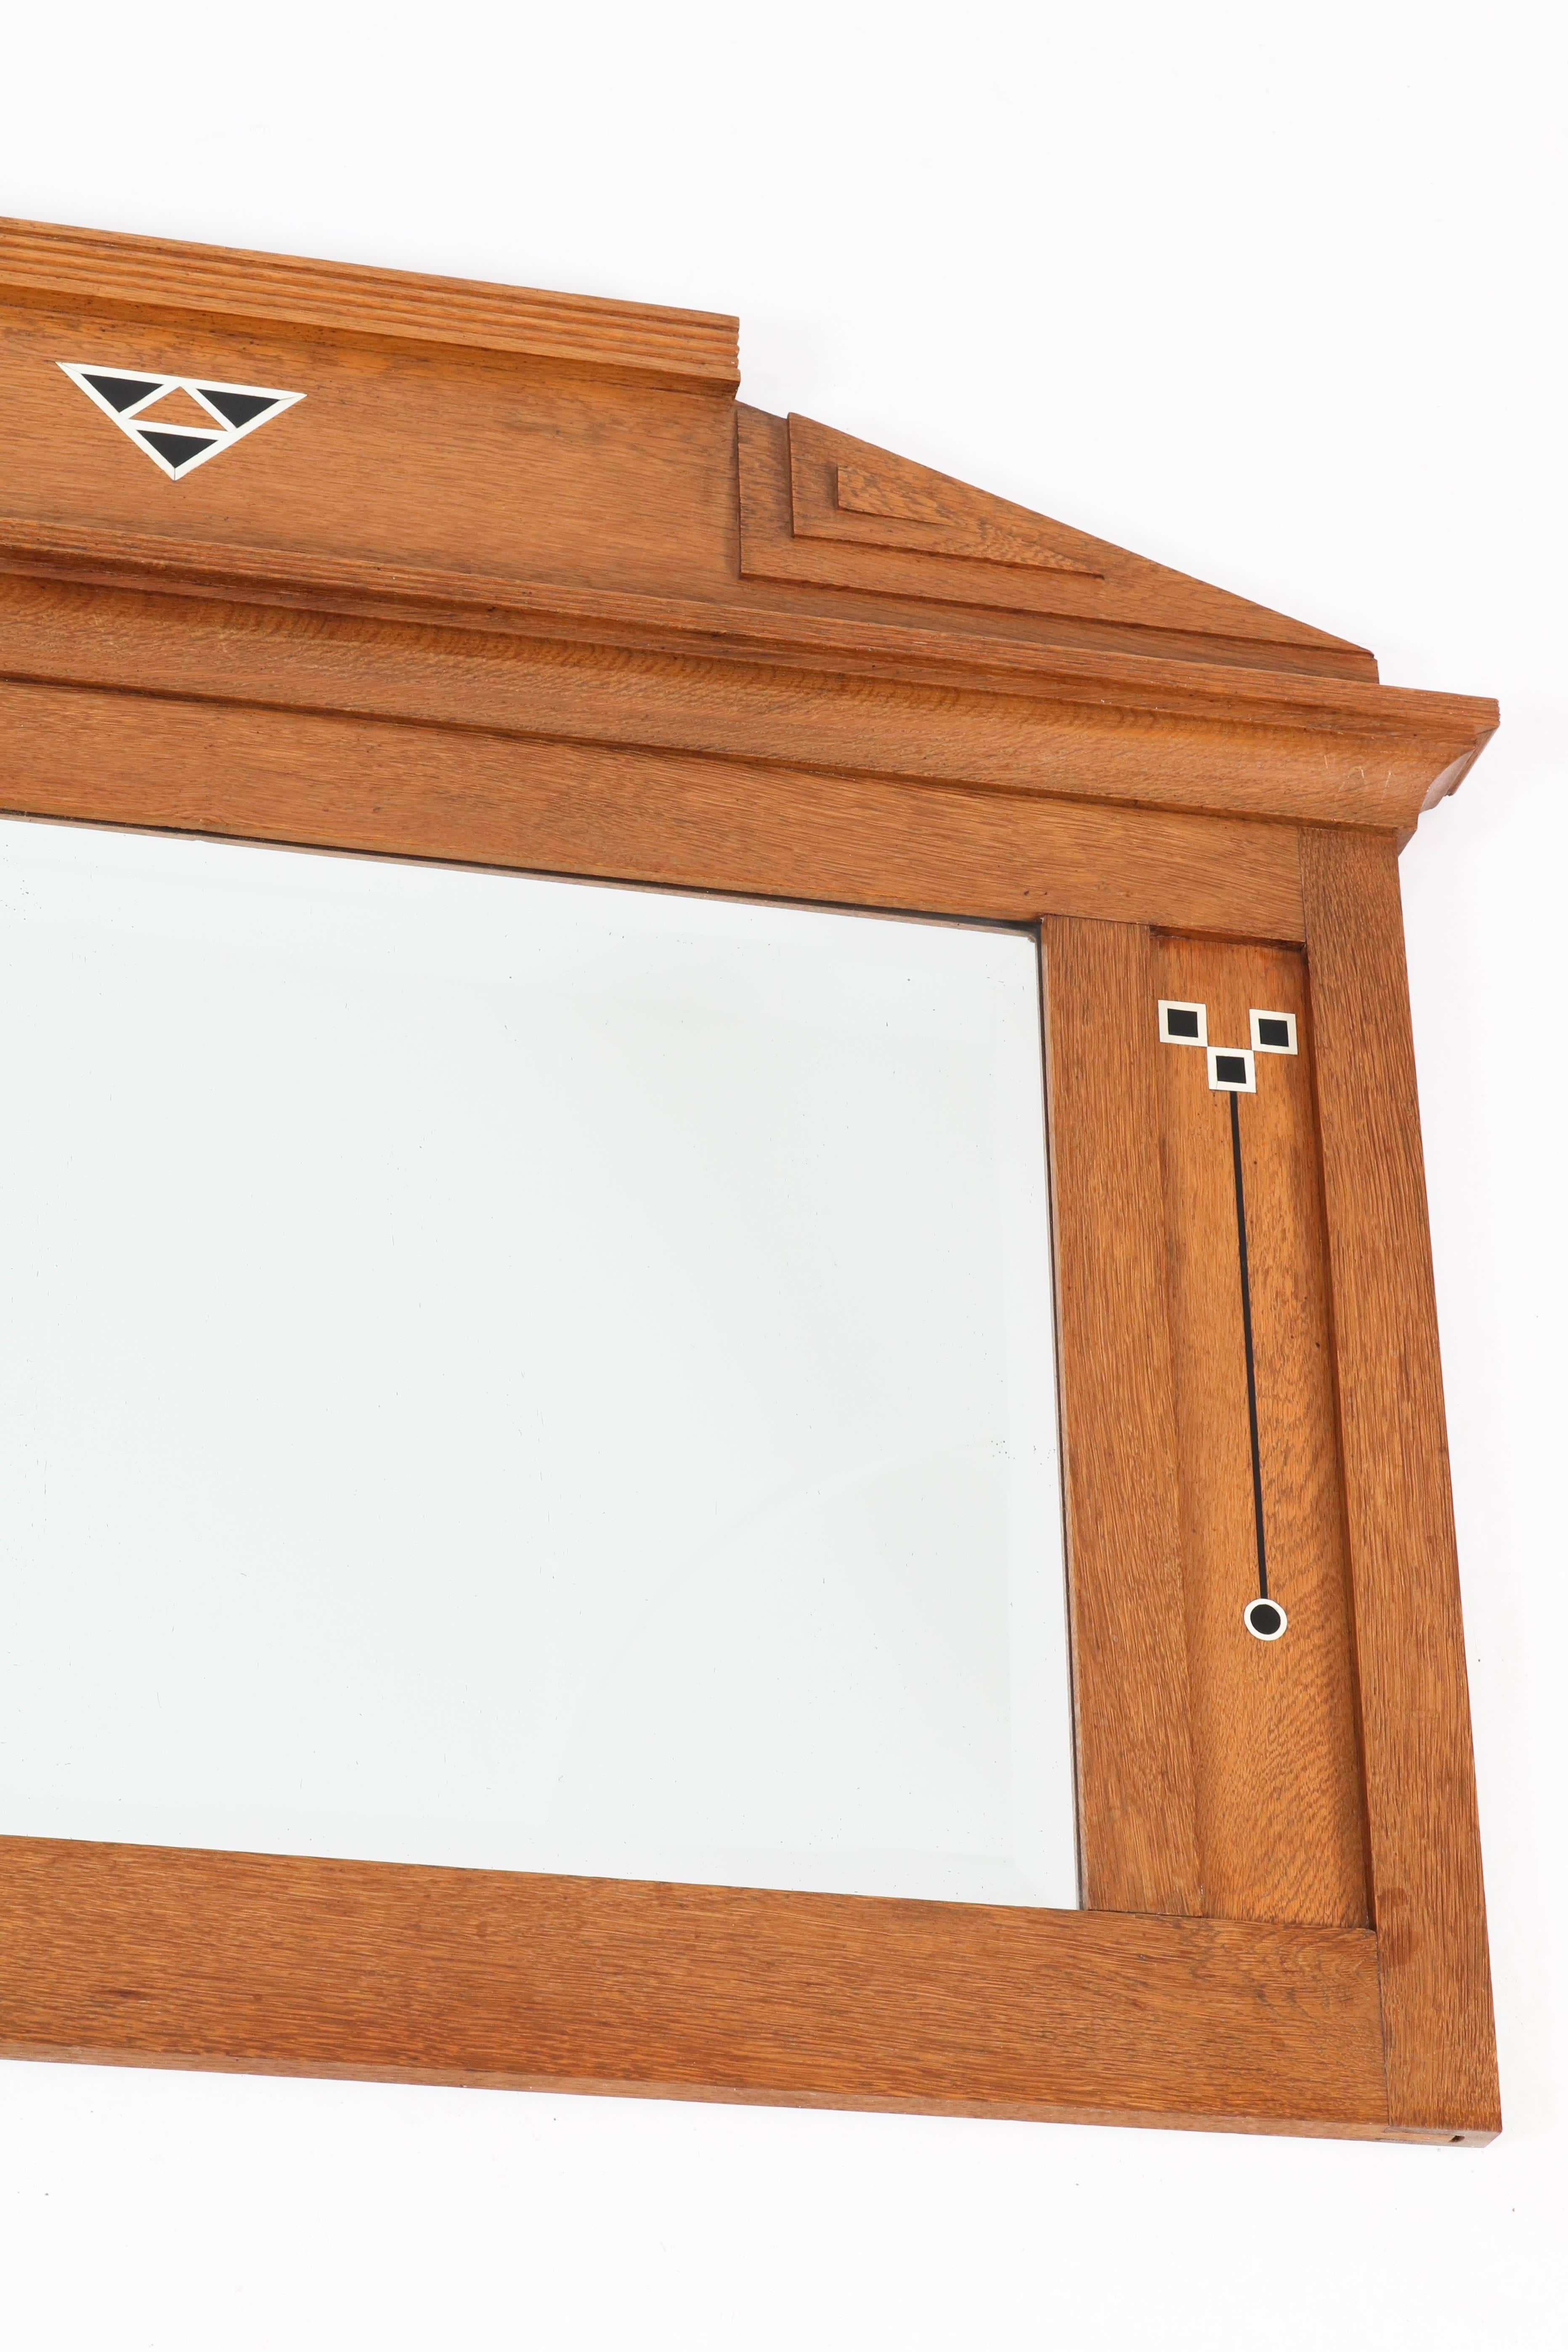 Dutch Art Nouveau mirror with inlay.
Solid oak with original beveled glass.
In good original condition with minor wear consistent with age and use,
preserving a beautiful patina.